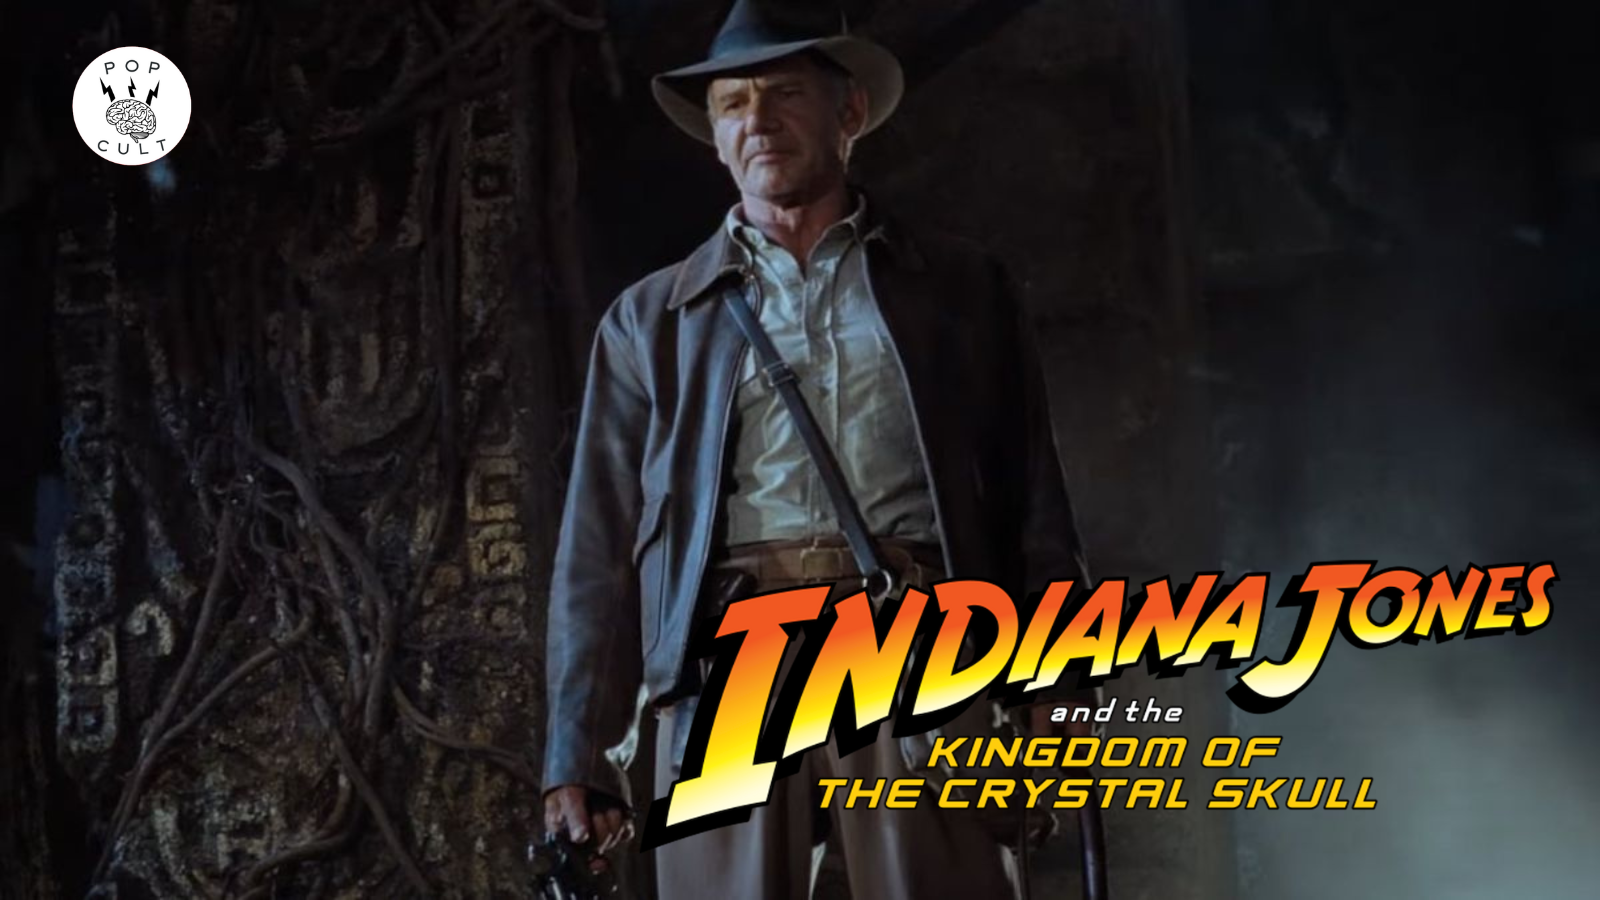 Indiana Jones and the Kingdom of the Crystal Skull 2008, directed by Steven  Spielberg